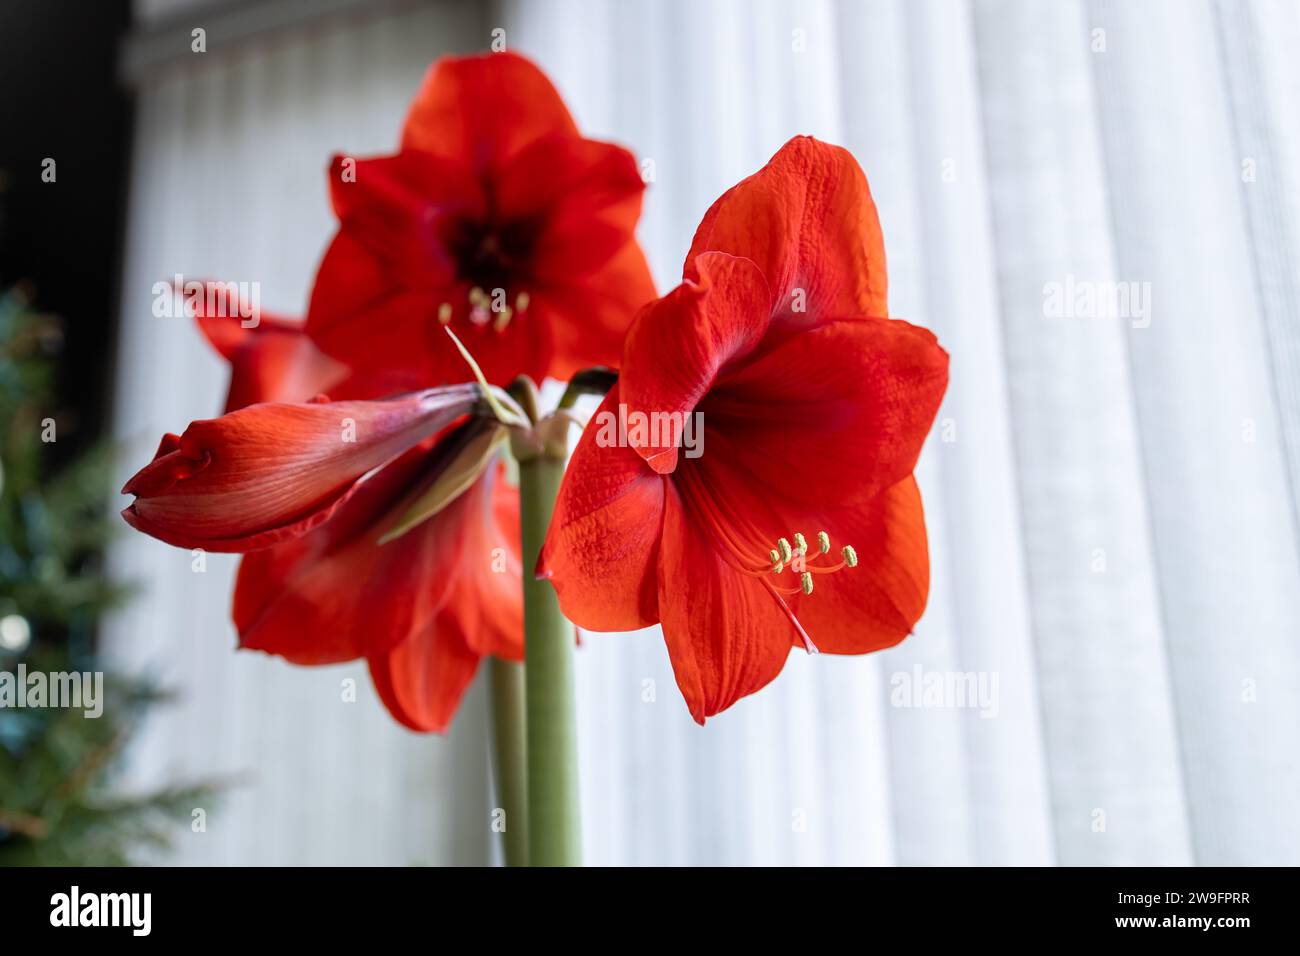 Abstract view of a red amaryllis plant flower in bloom with defocused white vertical blinds background Stock Photo